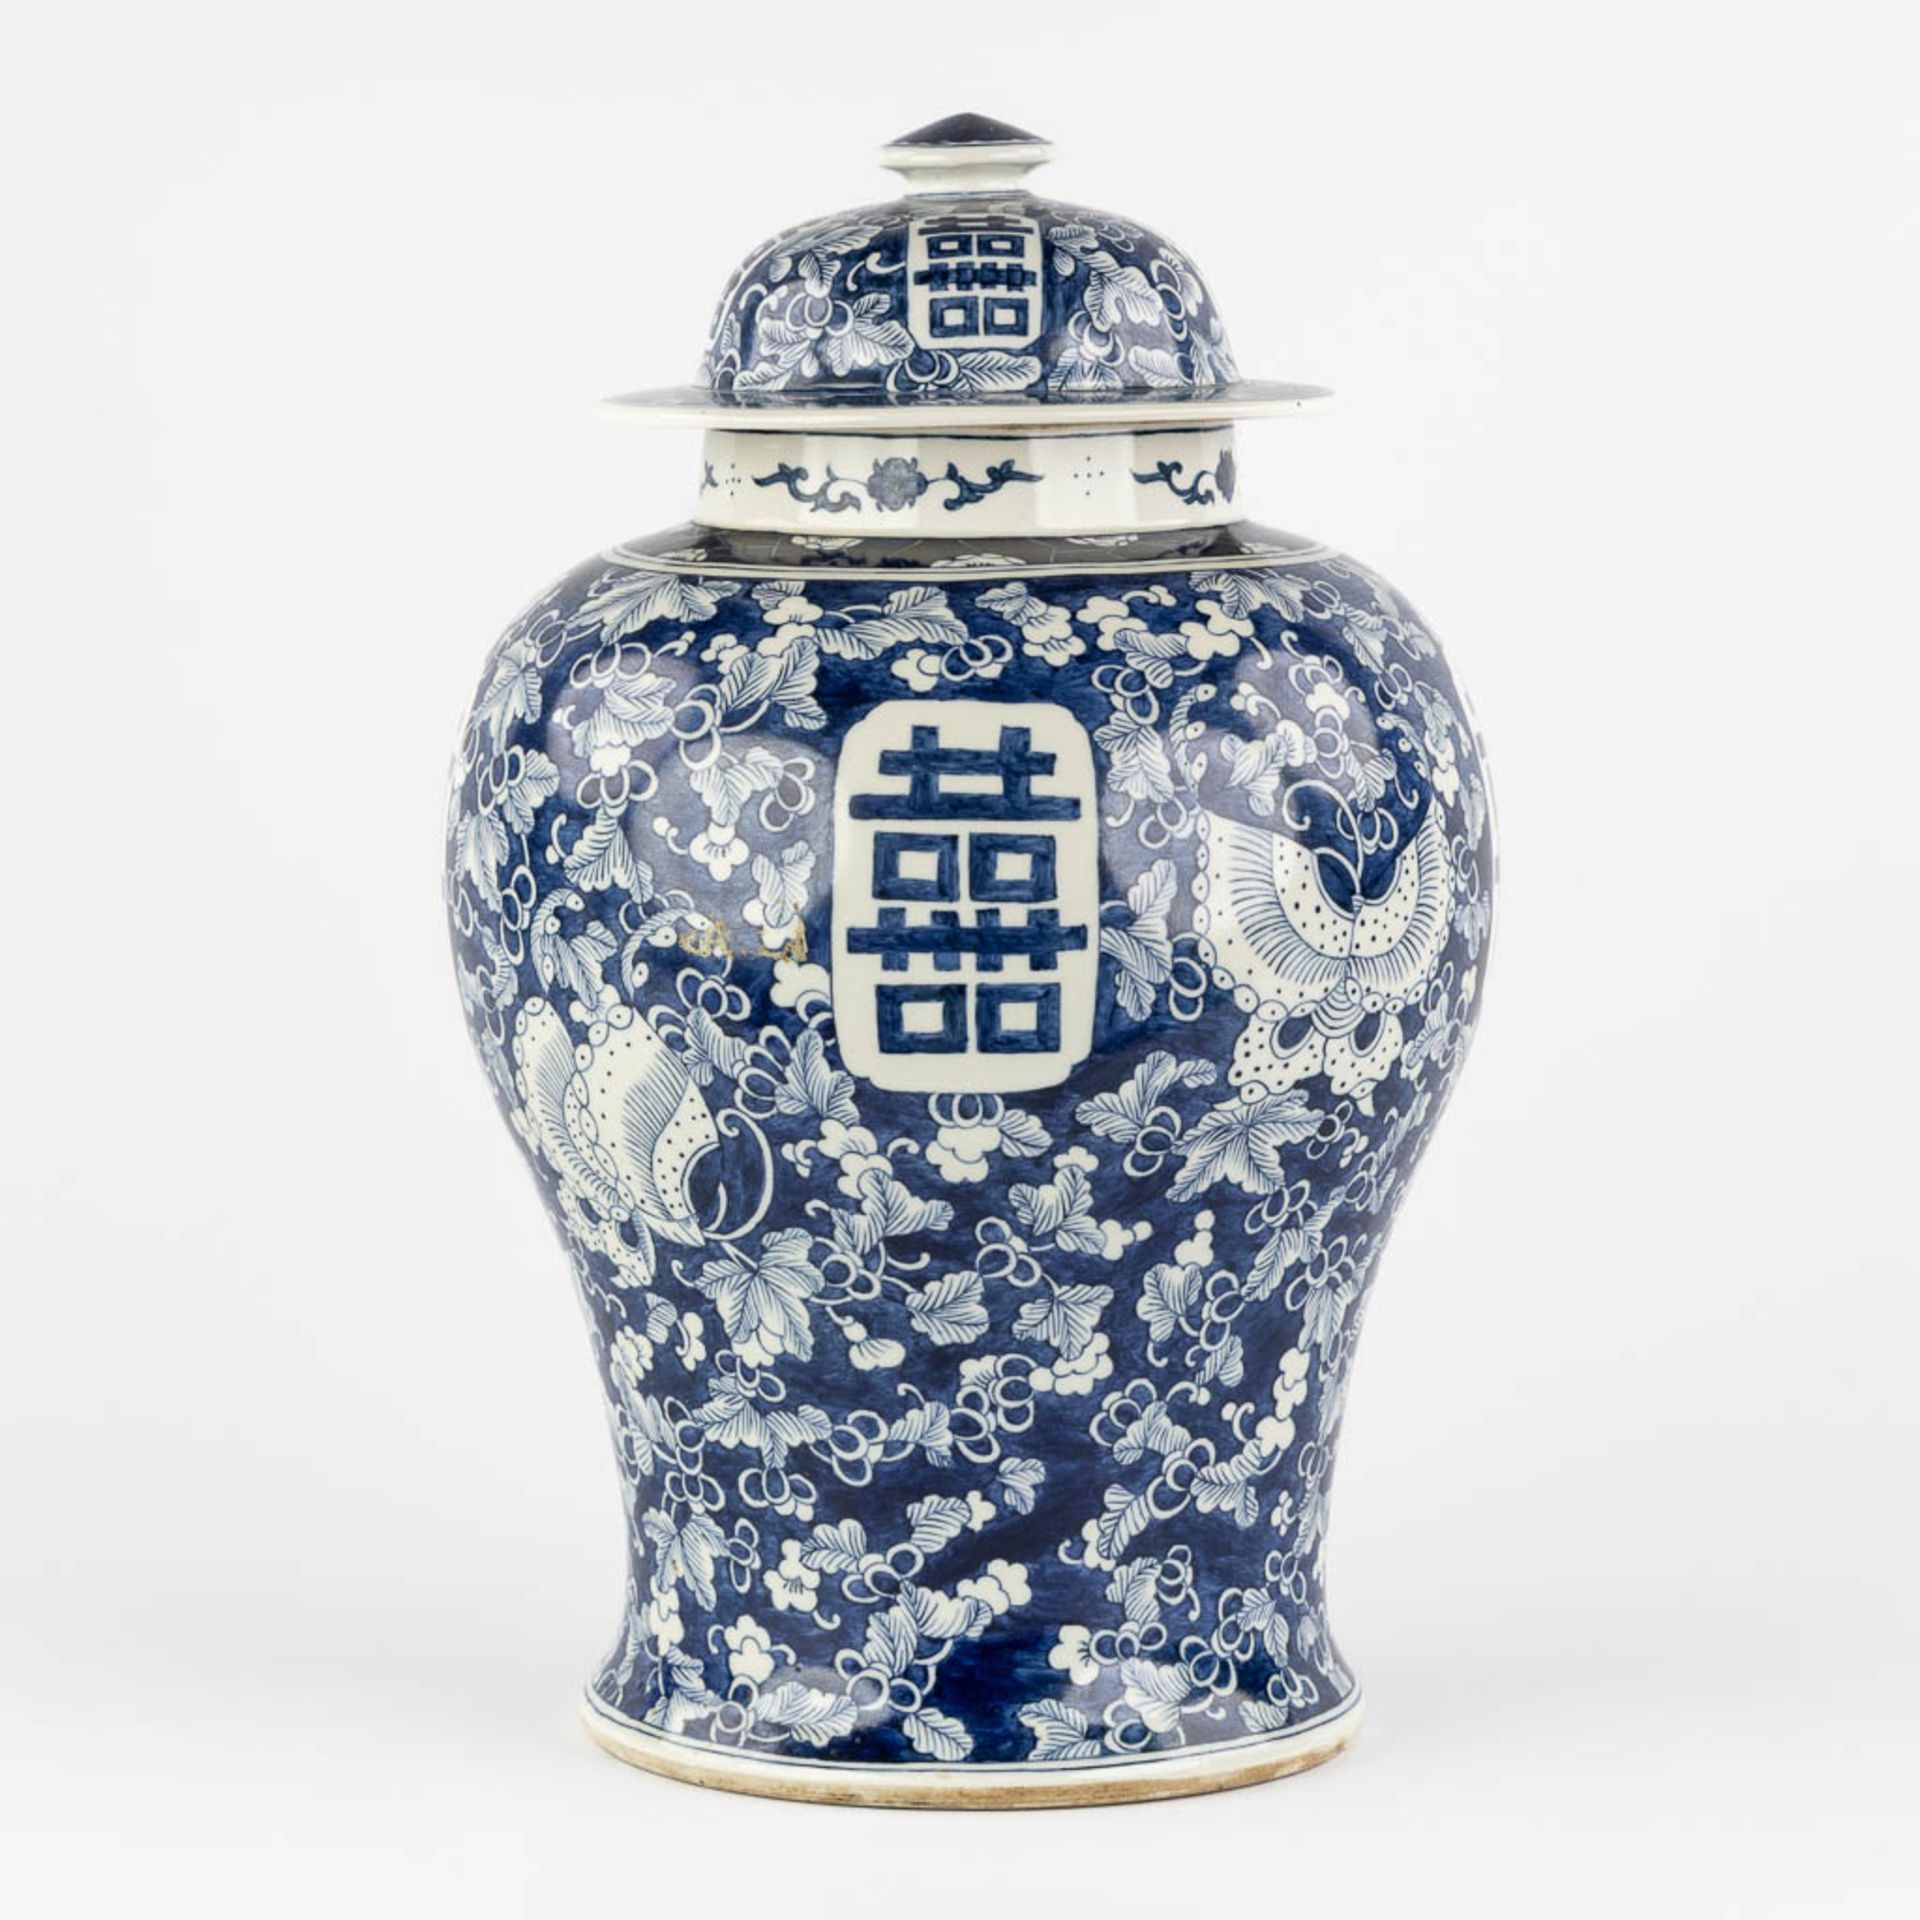 A Chinese baluster vase, blue-white with a Prunus decor and double XI sign. 19th/20th C. (H:42 x D:2 - Image 4 of 17